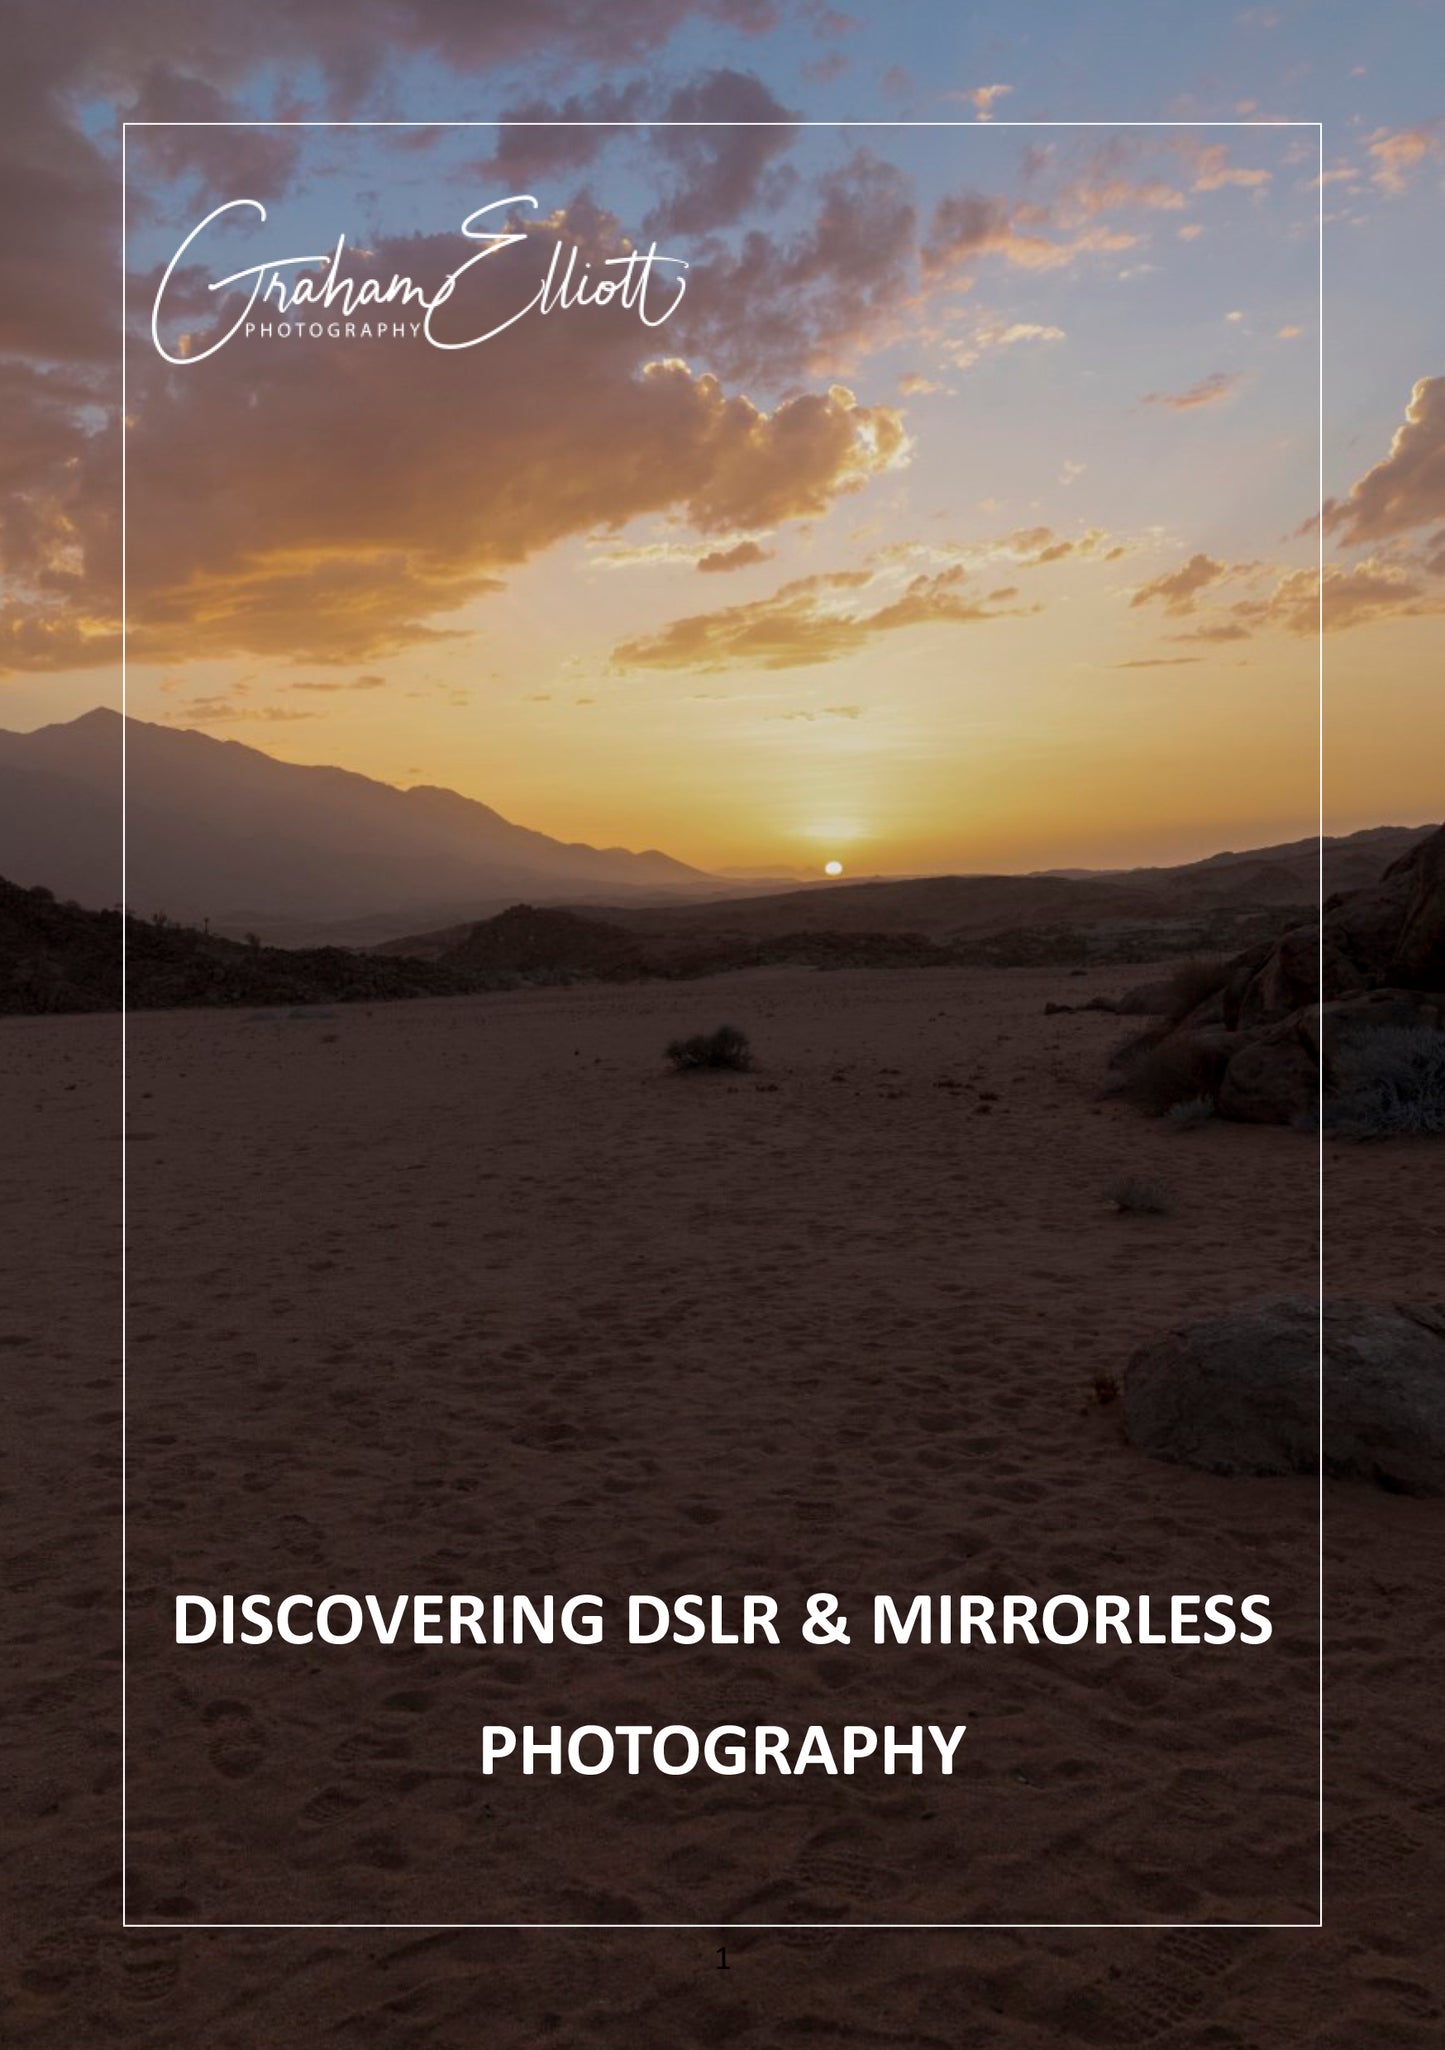 Discovering DSLR & Mirrorless Photography Online Course